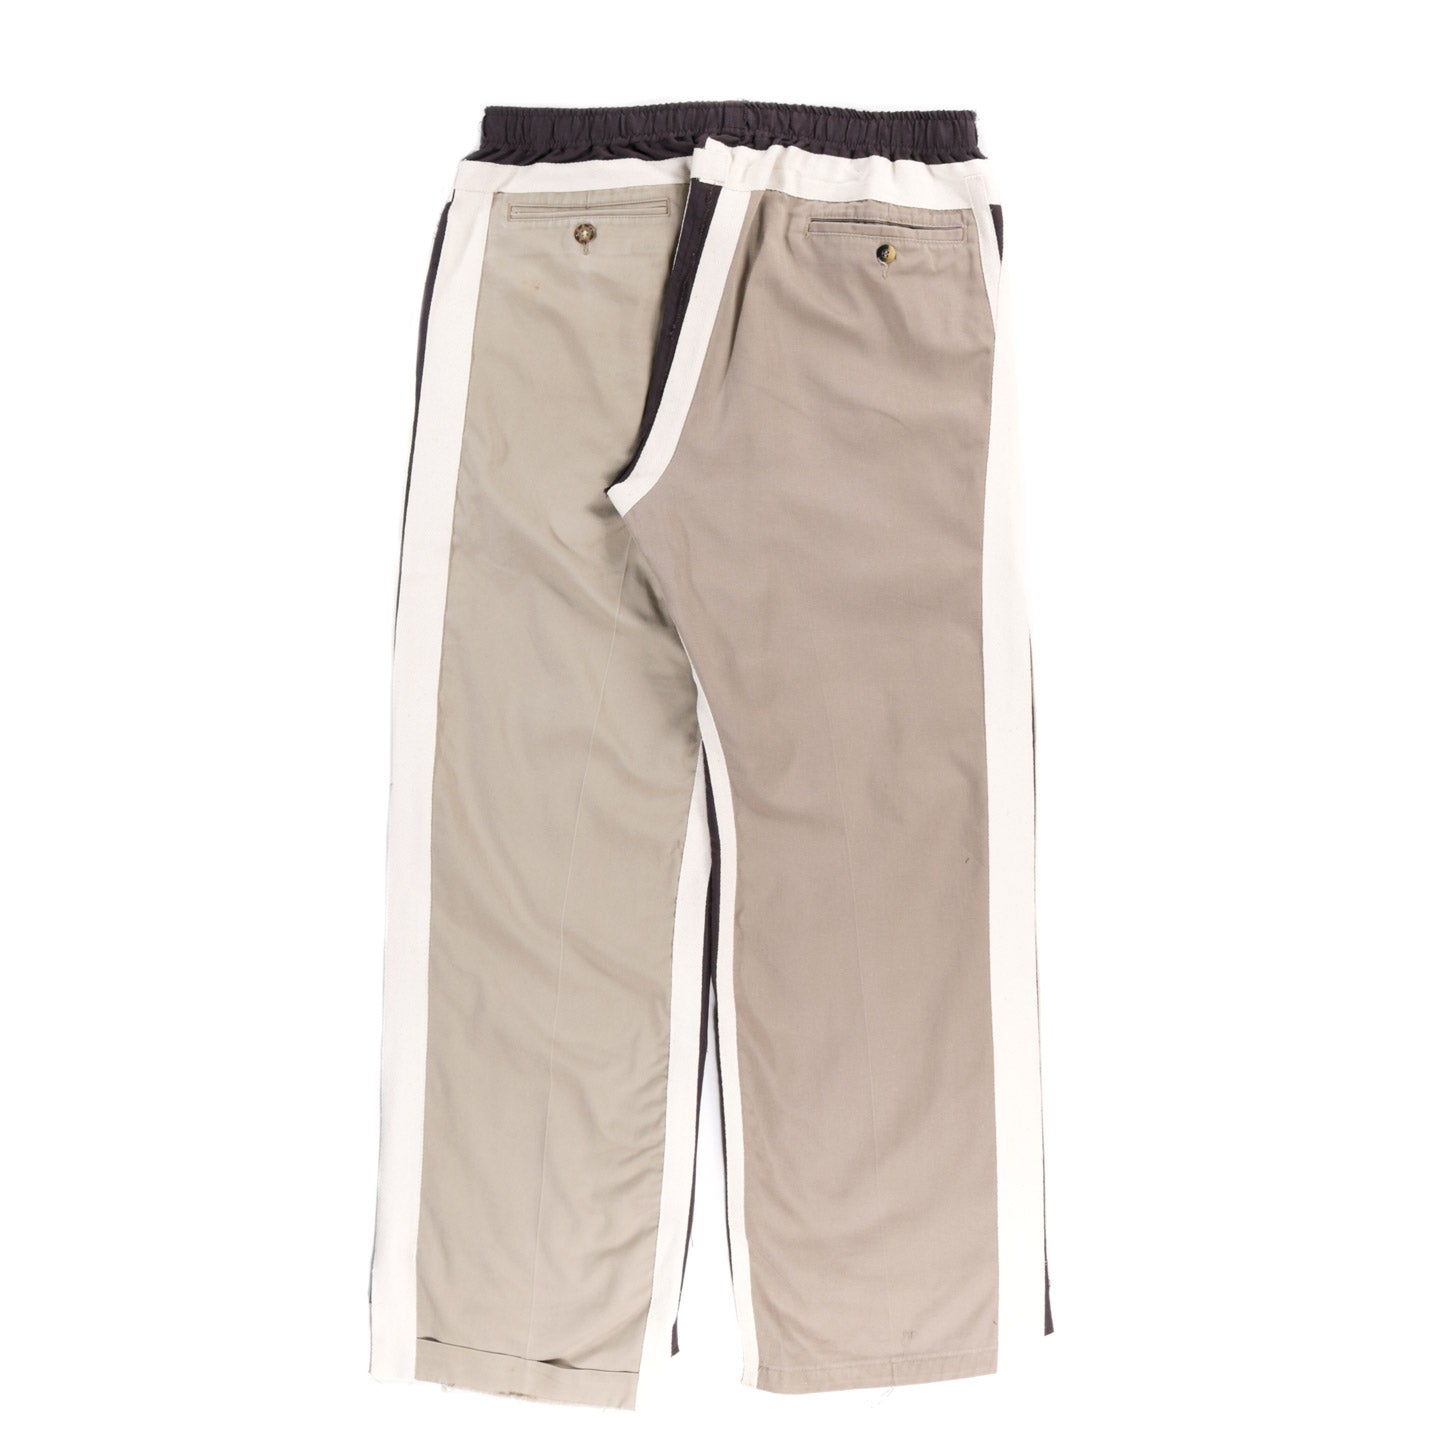 REBUILD BY NEEDLES CHINO COVERED PANT CHARCOAL - M (A)